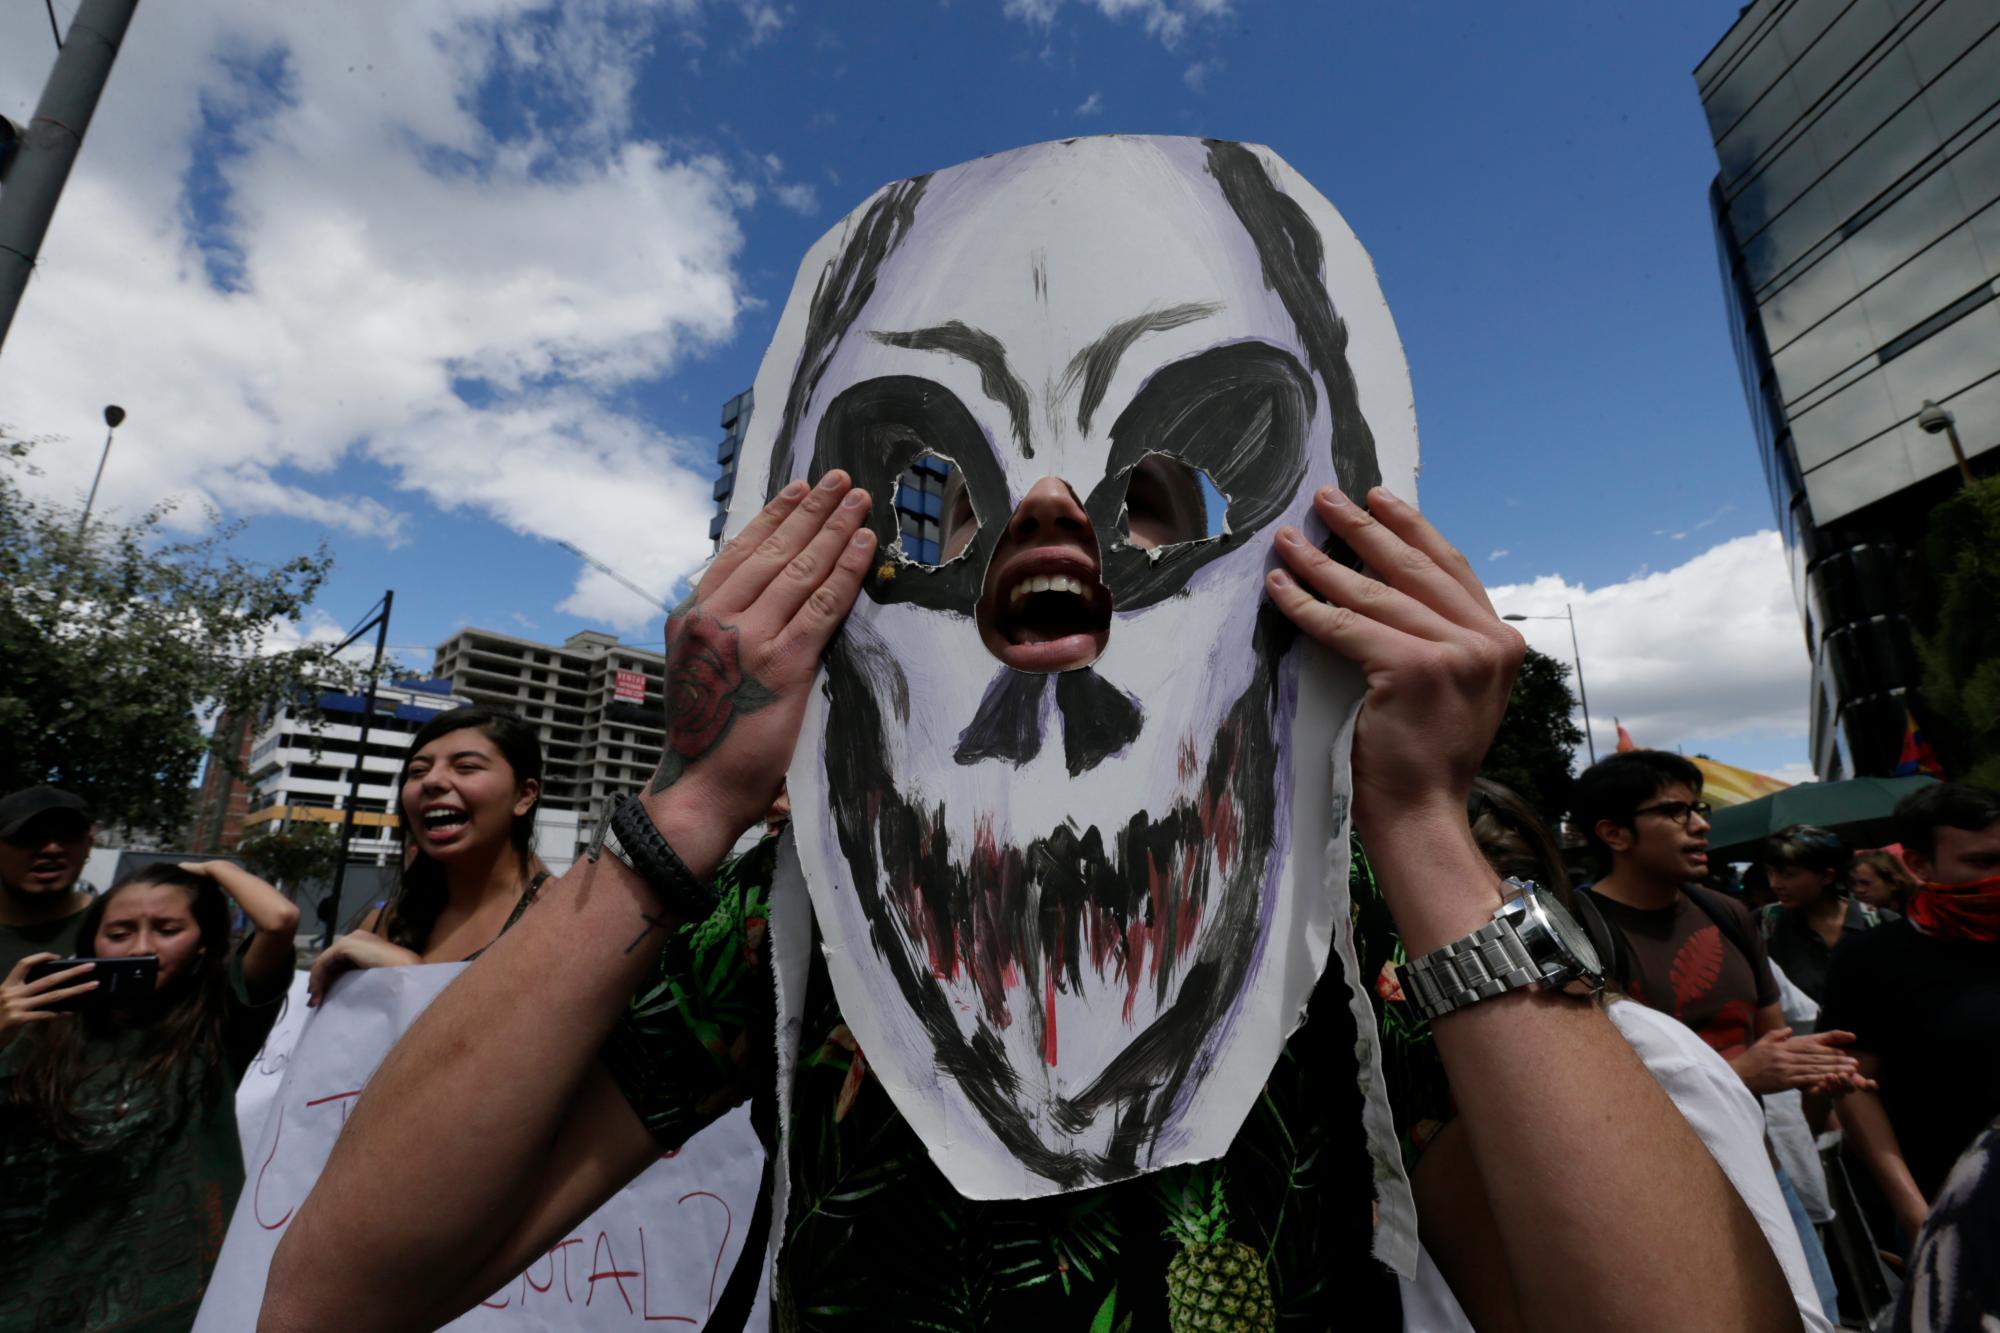 People gather outside the Brazilian embassy during a demonstration demanding something be done about the fires that have been breaking out at an unusual pace in Brazil this year, causing global alarm over deforestation in the Amazon region, in Quito, Ecuador, Friday, Aug. 23, 2019. Under increasing international pressure to contain fires sweeping parts of the Amazon, Brazilian President Jair Bolsonaro on Friday authorized use of the military to battle the massive blazes. 